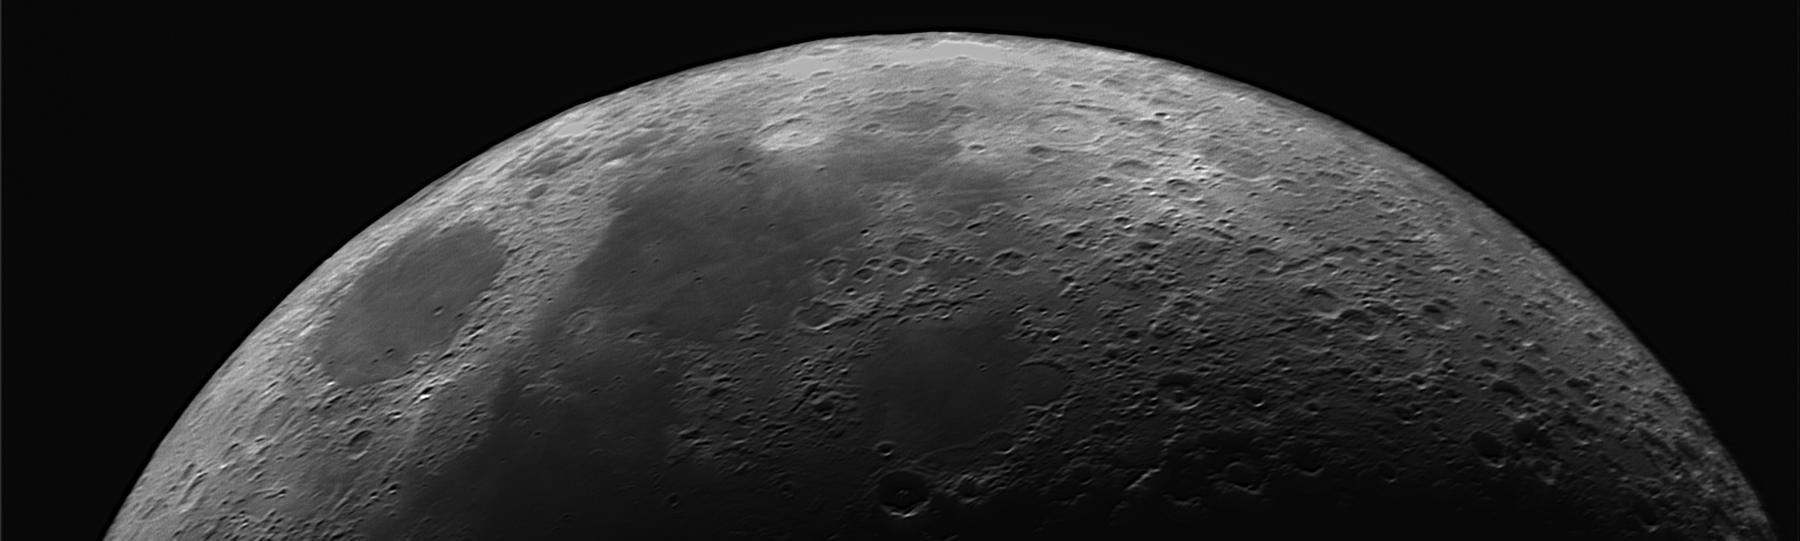 Top half on Moon with visible craters against the blackness of space